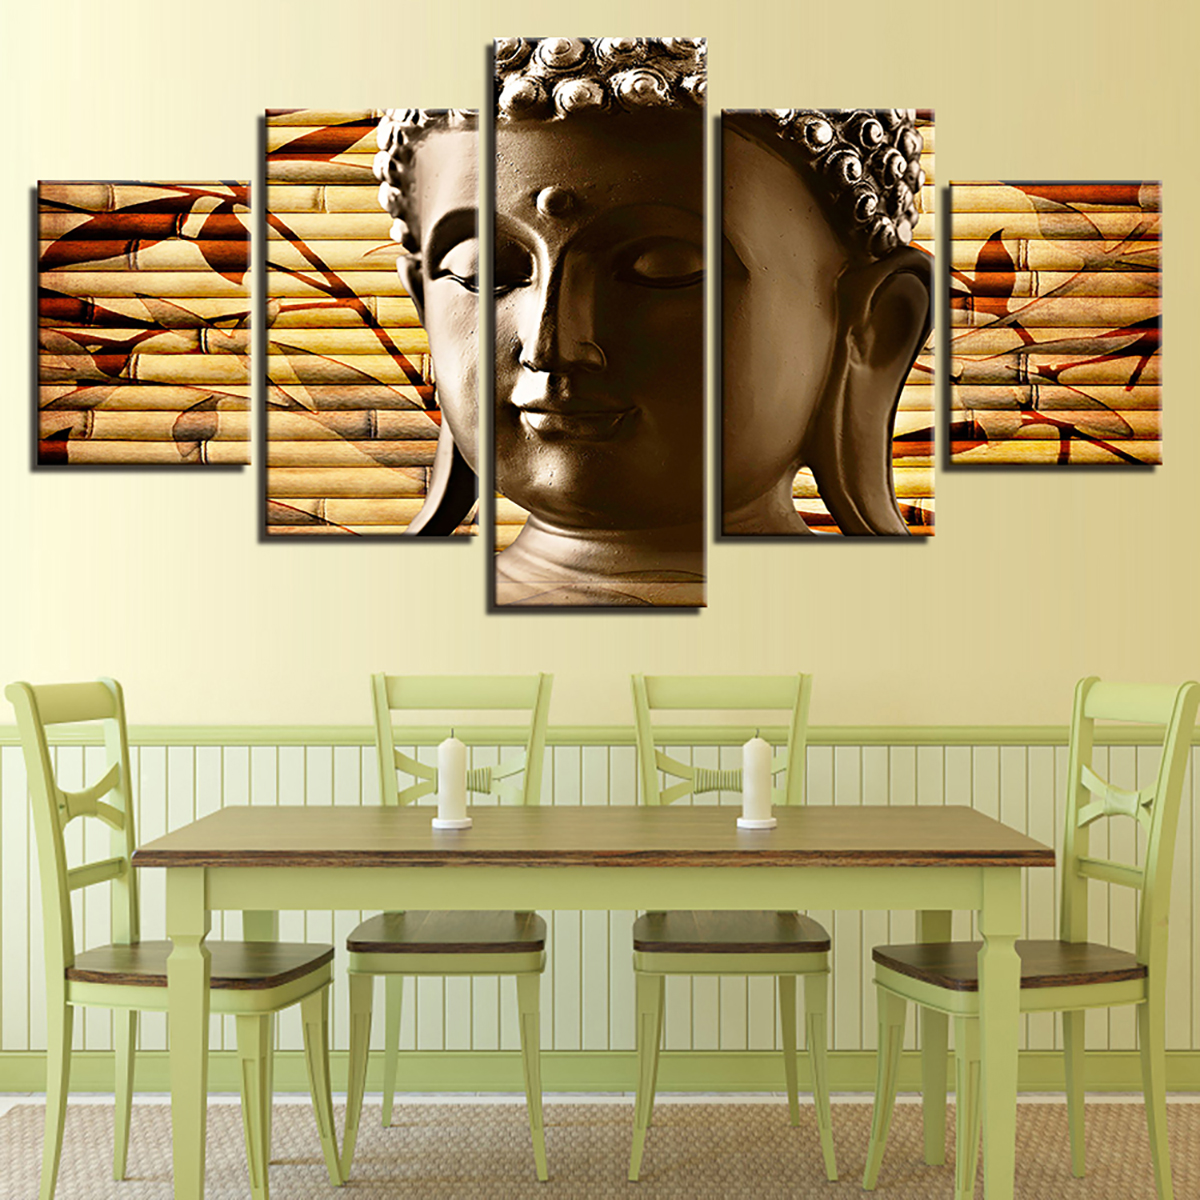 5Pcs-Canvas-Print-Paintings-Scenery-Oil-Painting-Wall-Decorative-Printing-Art-Picture-Frameless-Home-1758668-8